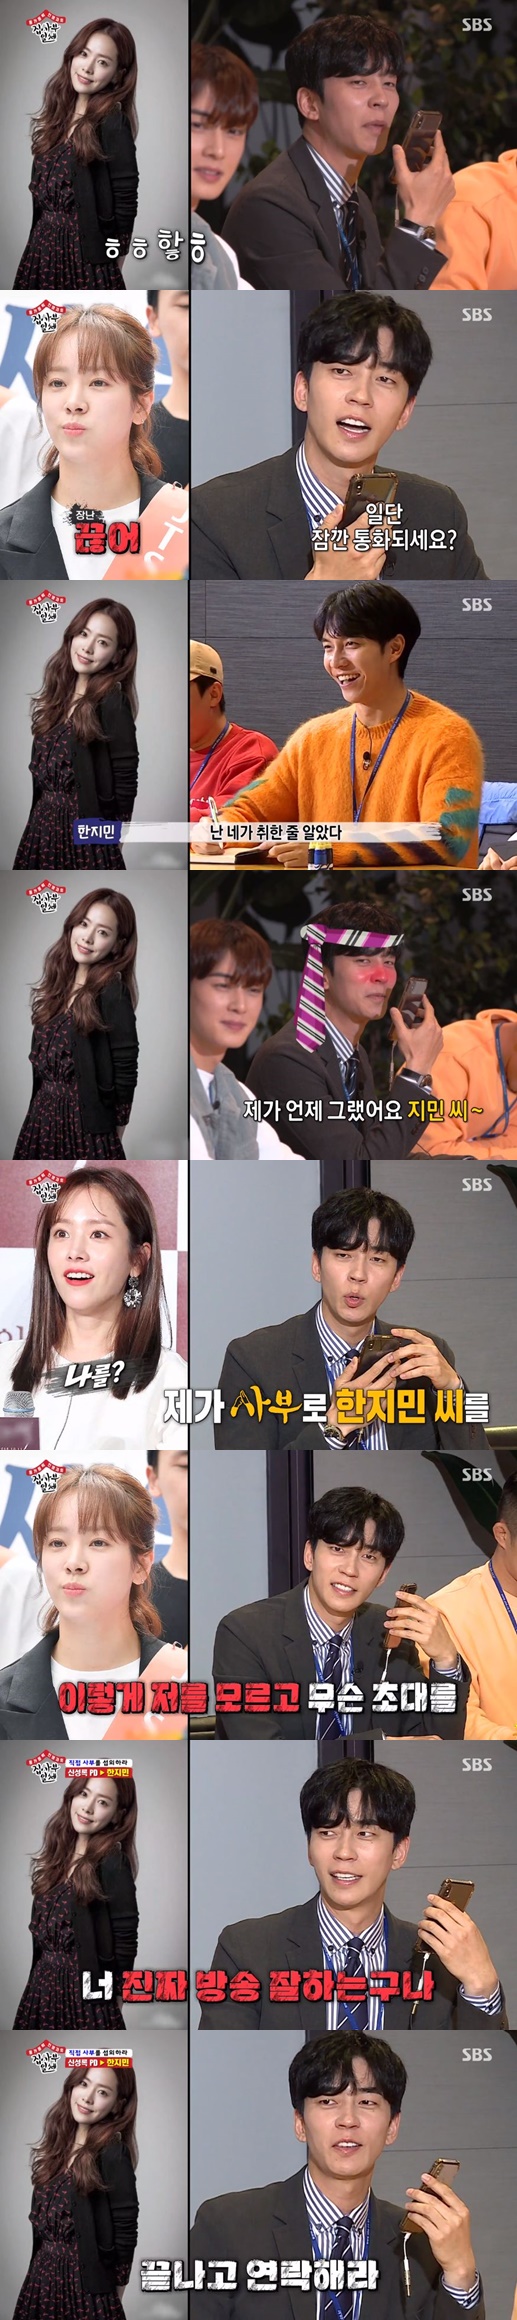 Actor Han Ji-min showed off his best friend with Shin Sung-rok.In the SBS entertainment program All The Butlers broadcasted on the afternoon of the 26th, Lee Seung-gi, Yang Se-hyeong, Shin Sung-rok, Cha Eun-woo and Kim Dong-Hyun were portrayed.On this day, the members went on a mission to meet the master, one of the interview processes.Shin Sung-rok called the questioning woman and introduced her as SBS The Internet PD Shin Sung-rok so the woman said, What is it? Are you on the air?and laughed. The person was Han Ji-min.Han Ji-min, who laughed like an absurd laugh, said, Stop in the words of Shin Sung-rok, Can you talk for a while? And made the scene into a laughing sea. I thought you were drunk.What are you doing now?Shin Sung-rok continued to explain to Han Ji-min, I am going to take a Master, and Han Ji-min said, I am?What master do you do? I wake up. You dont know me like this. Youre really good at broadcasting. I cant. Ill text. Call me.You try hard, too, he added a threatening word.